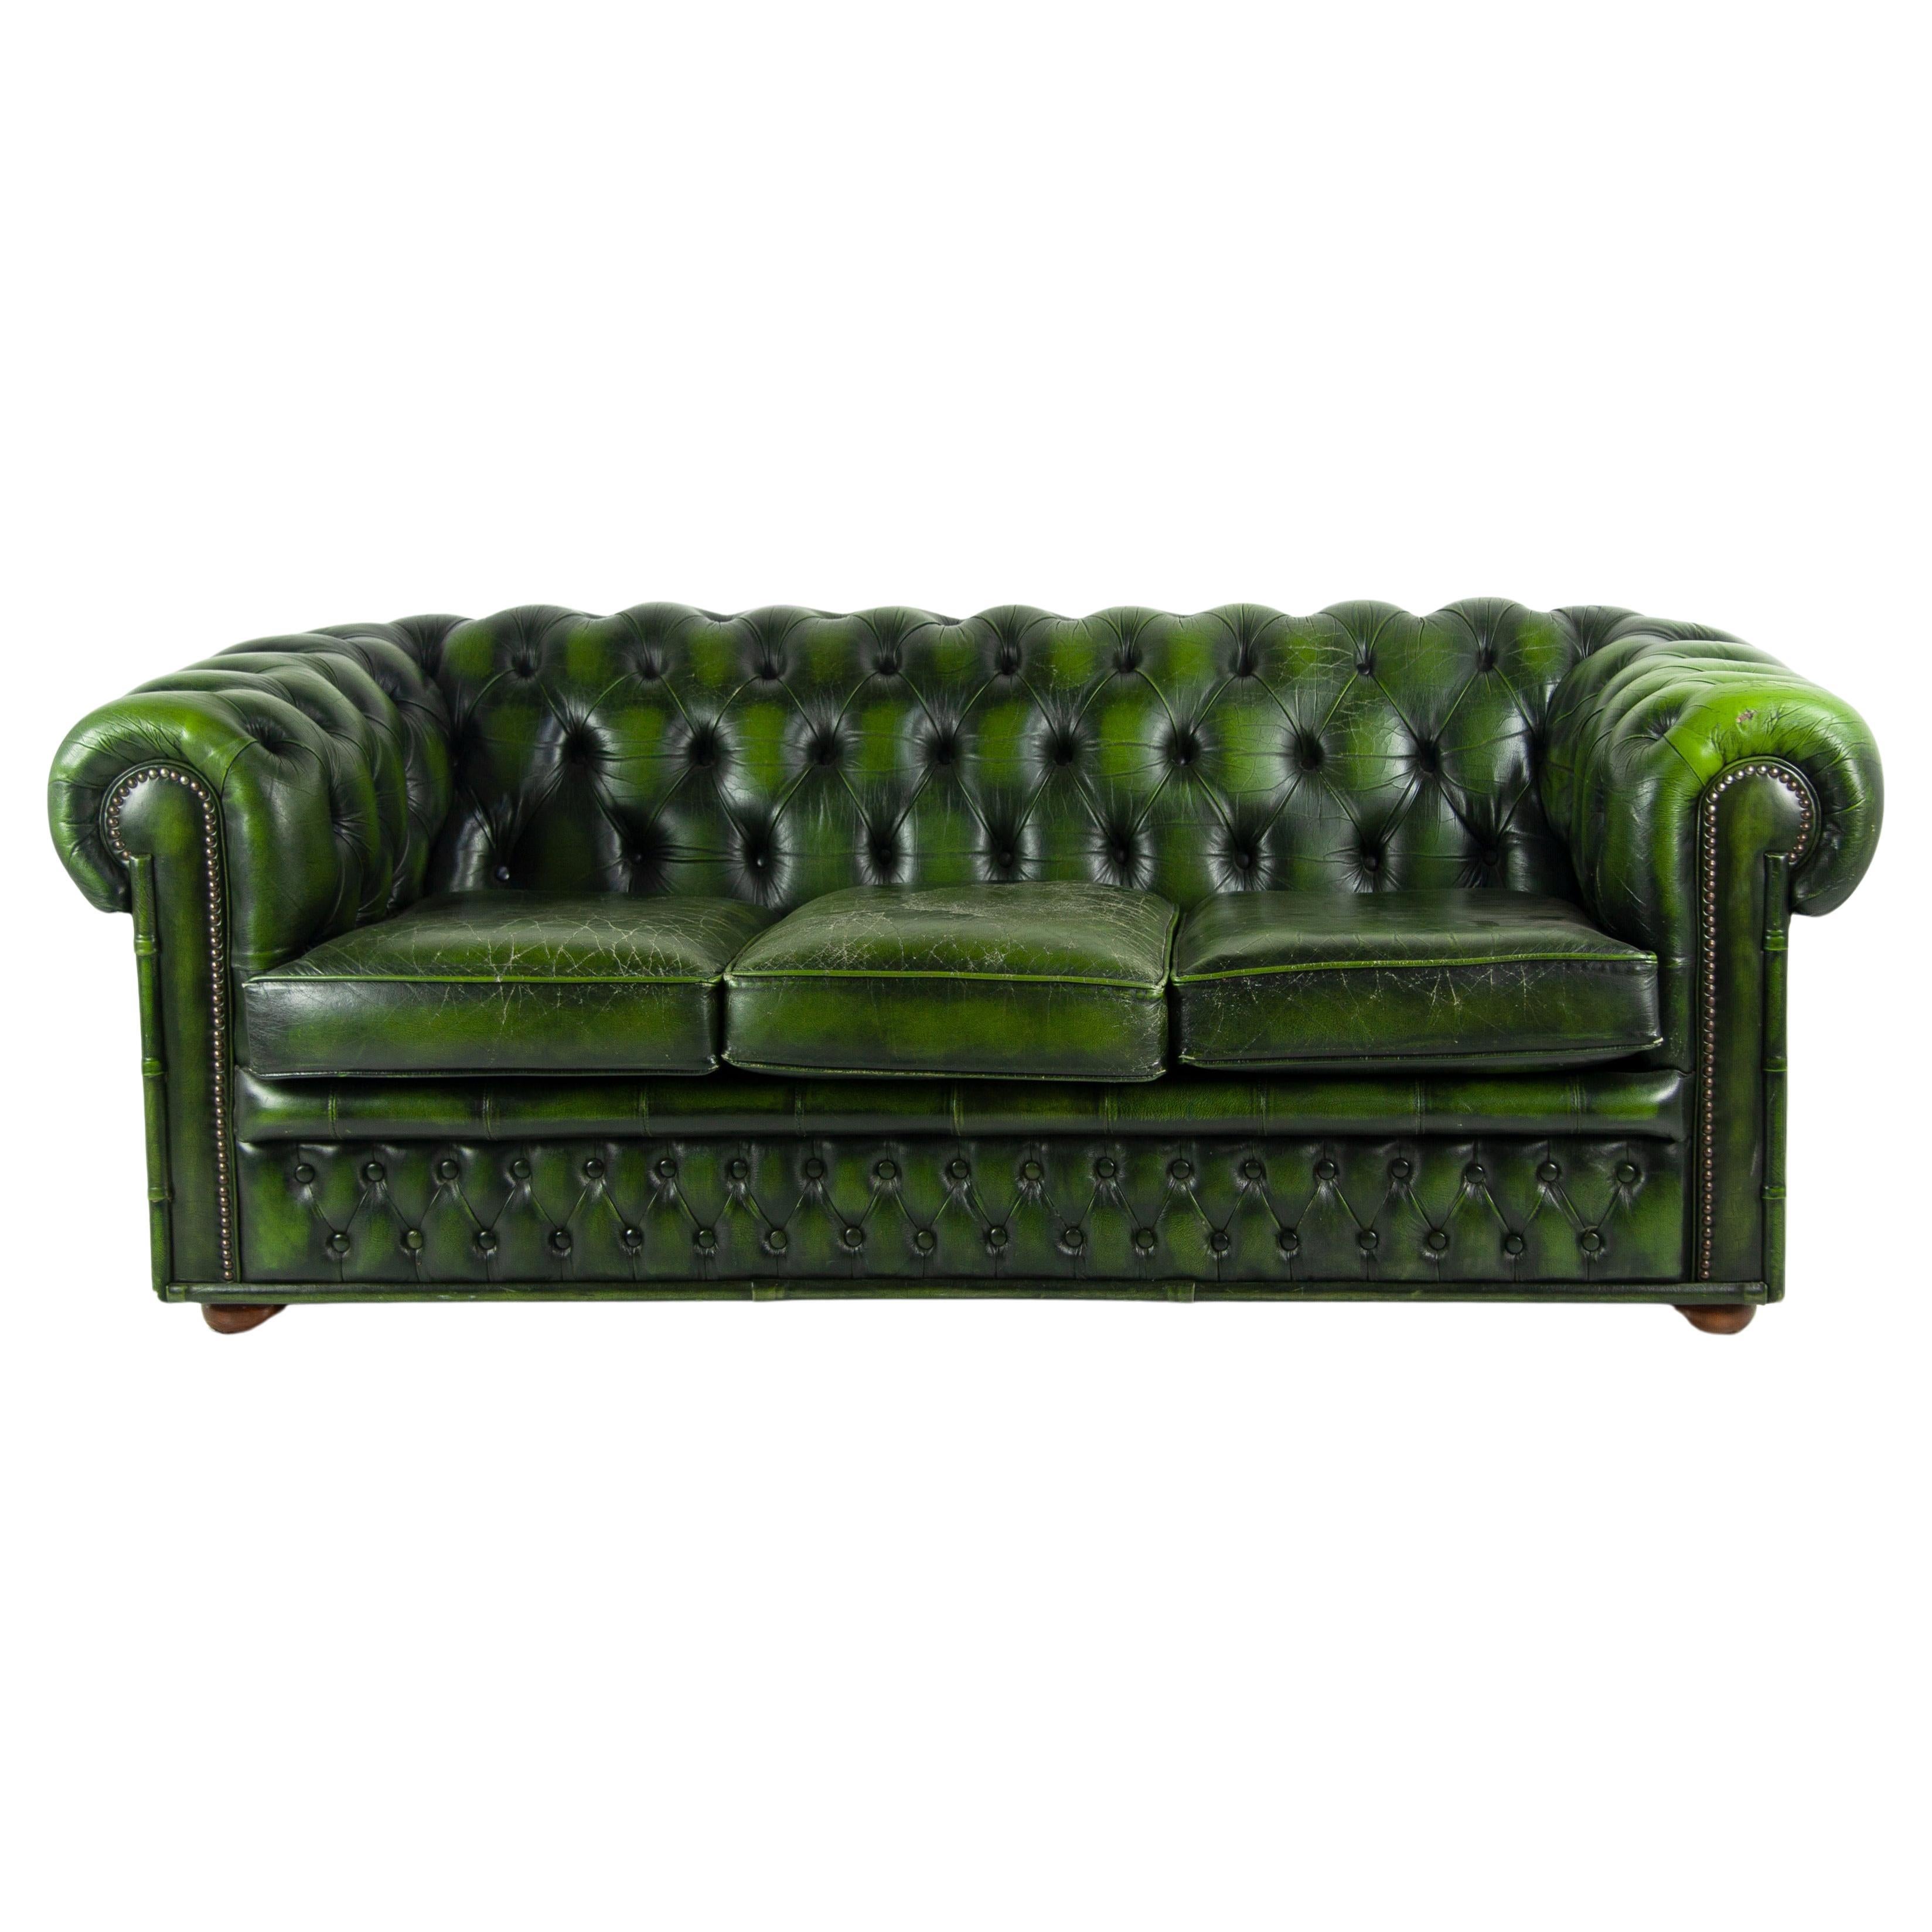 London Chesterfield Sofa in Petrol Green, 1960s